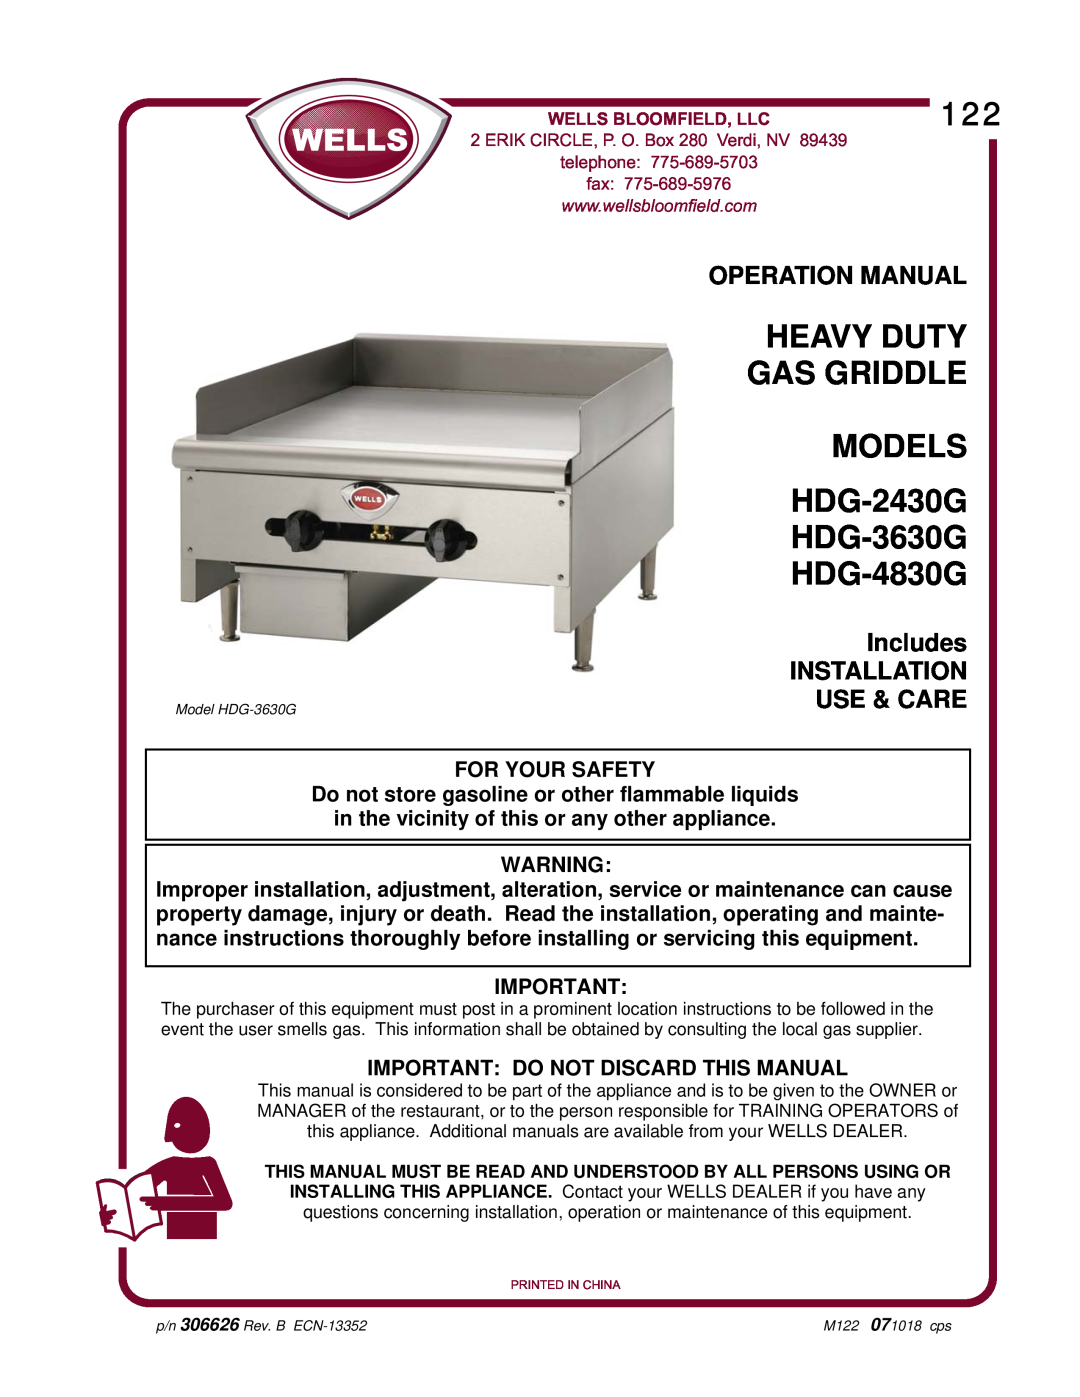 Wells HDG-4830G operation manual Operation Manual, Includes INSTALLATION USE & CARE, Important: Do Not Discard This Manual 